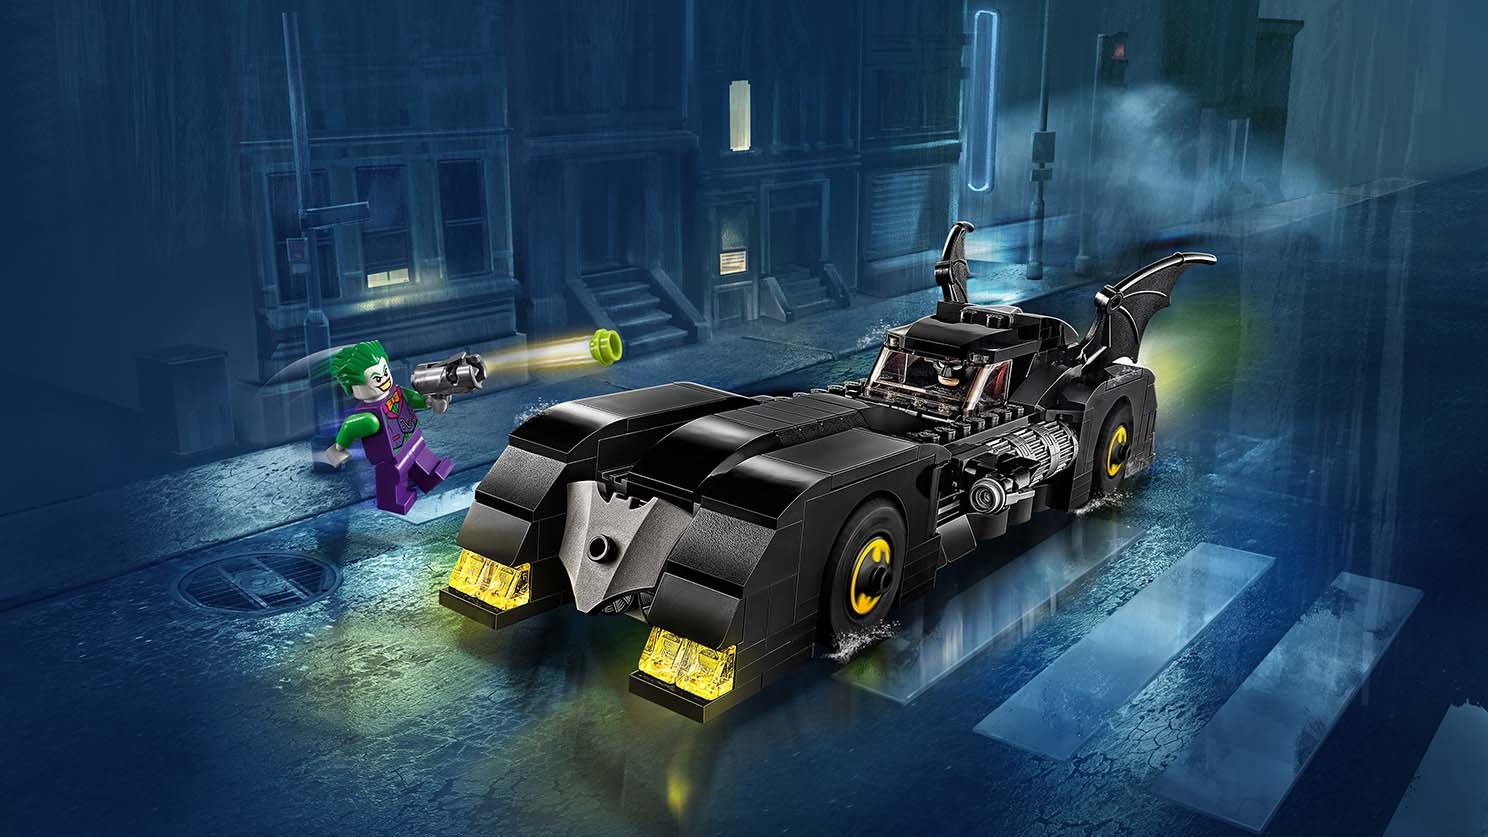 The Lego Batman Movie' swings into action - CNET